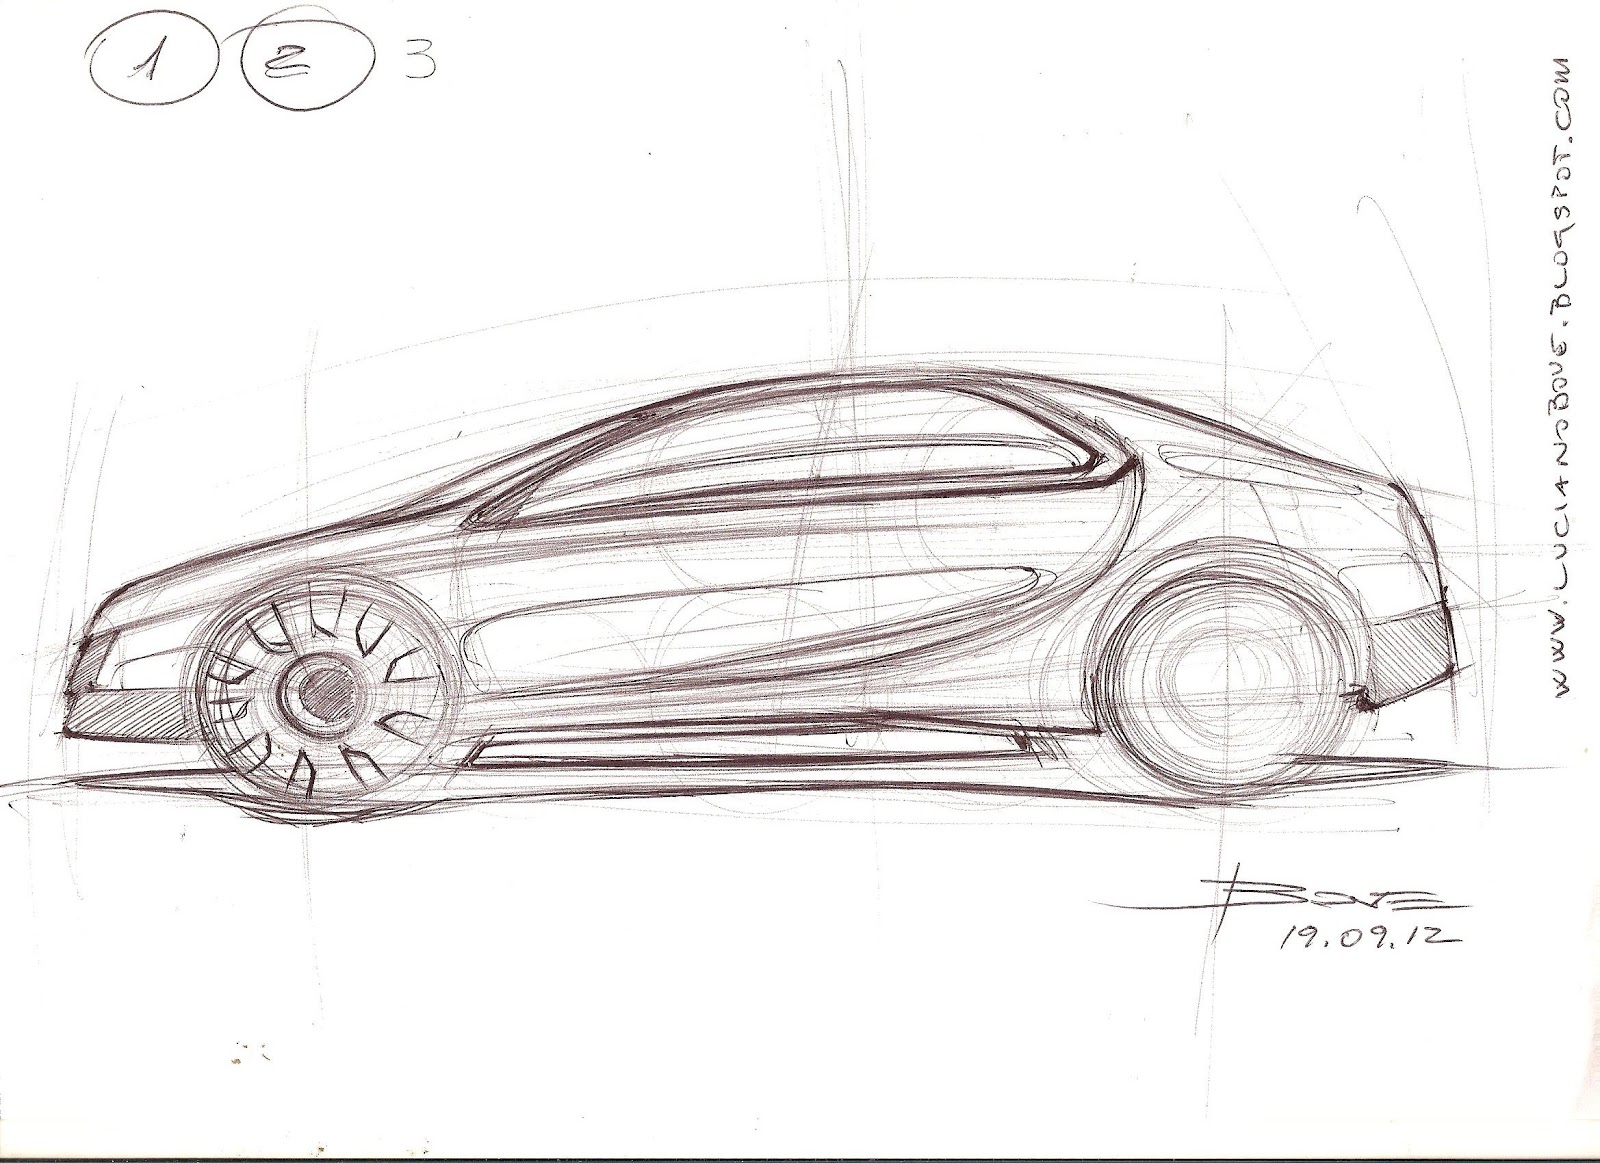 Car Sketch Tutorial The Side View By Luciano Bove